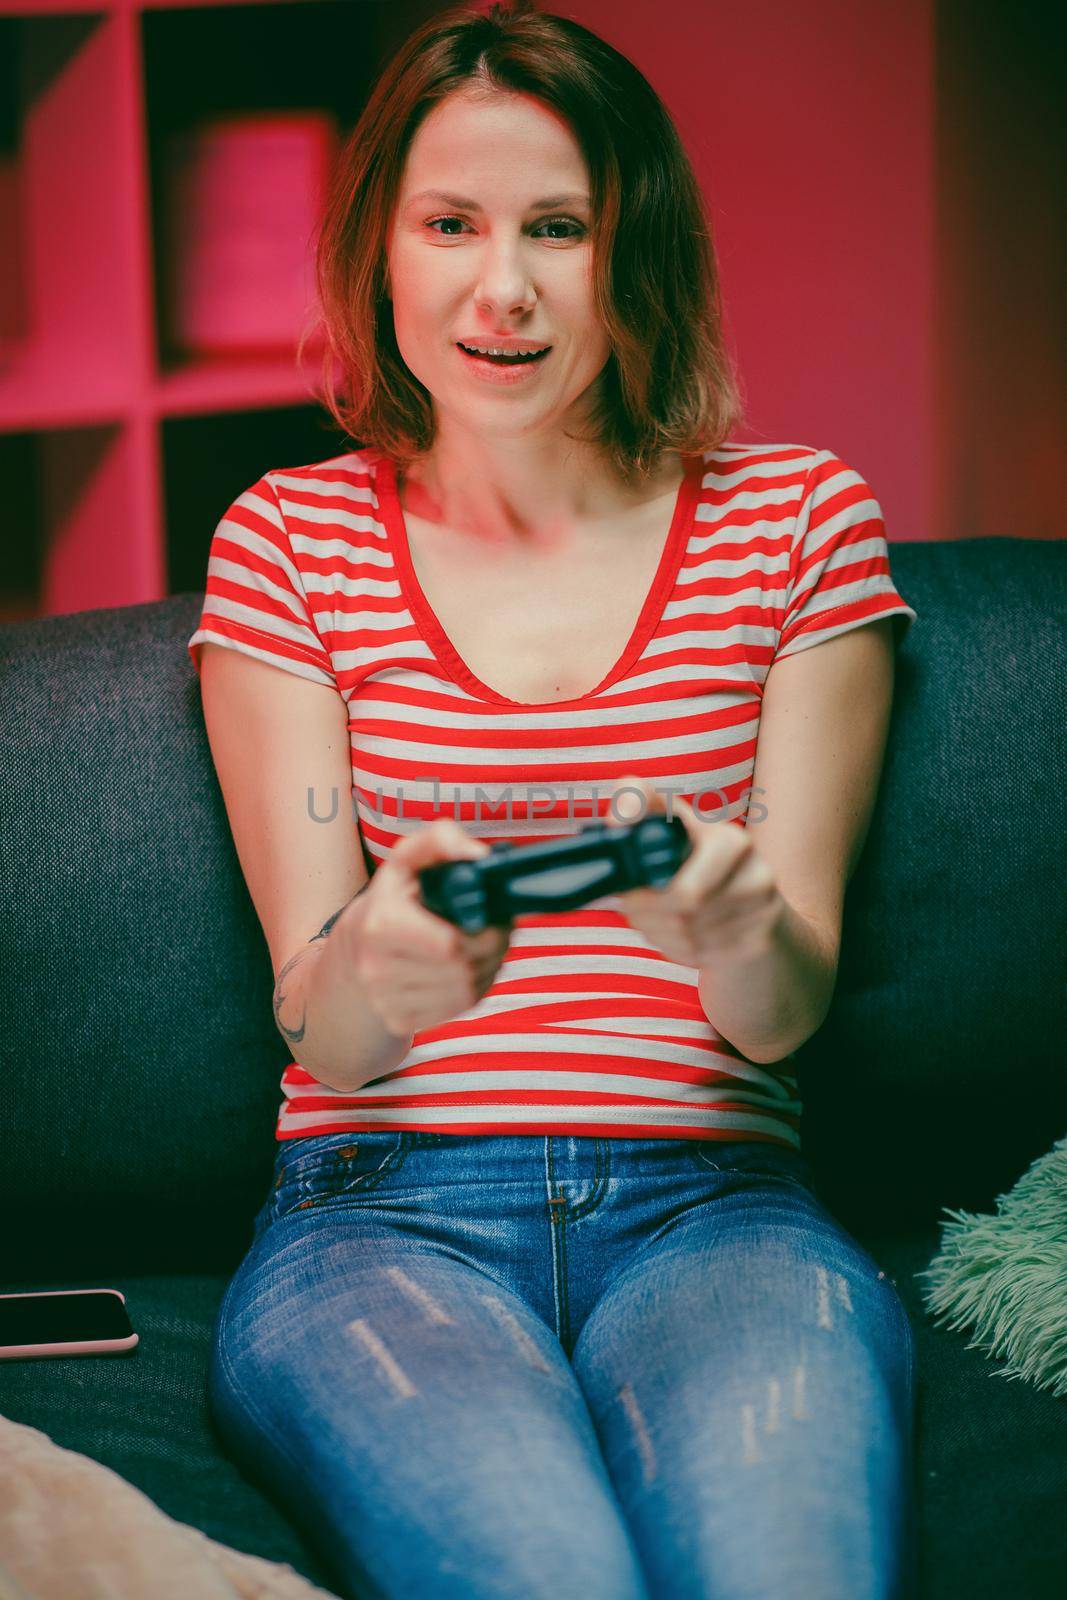 Determined girl playing a video game at living room at night. Gamer woman sitting on a sofa, playing in video games on a console and using a wireless controller. by uflypro